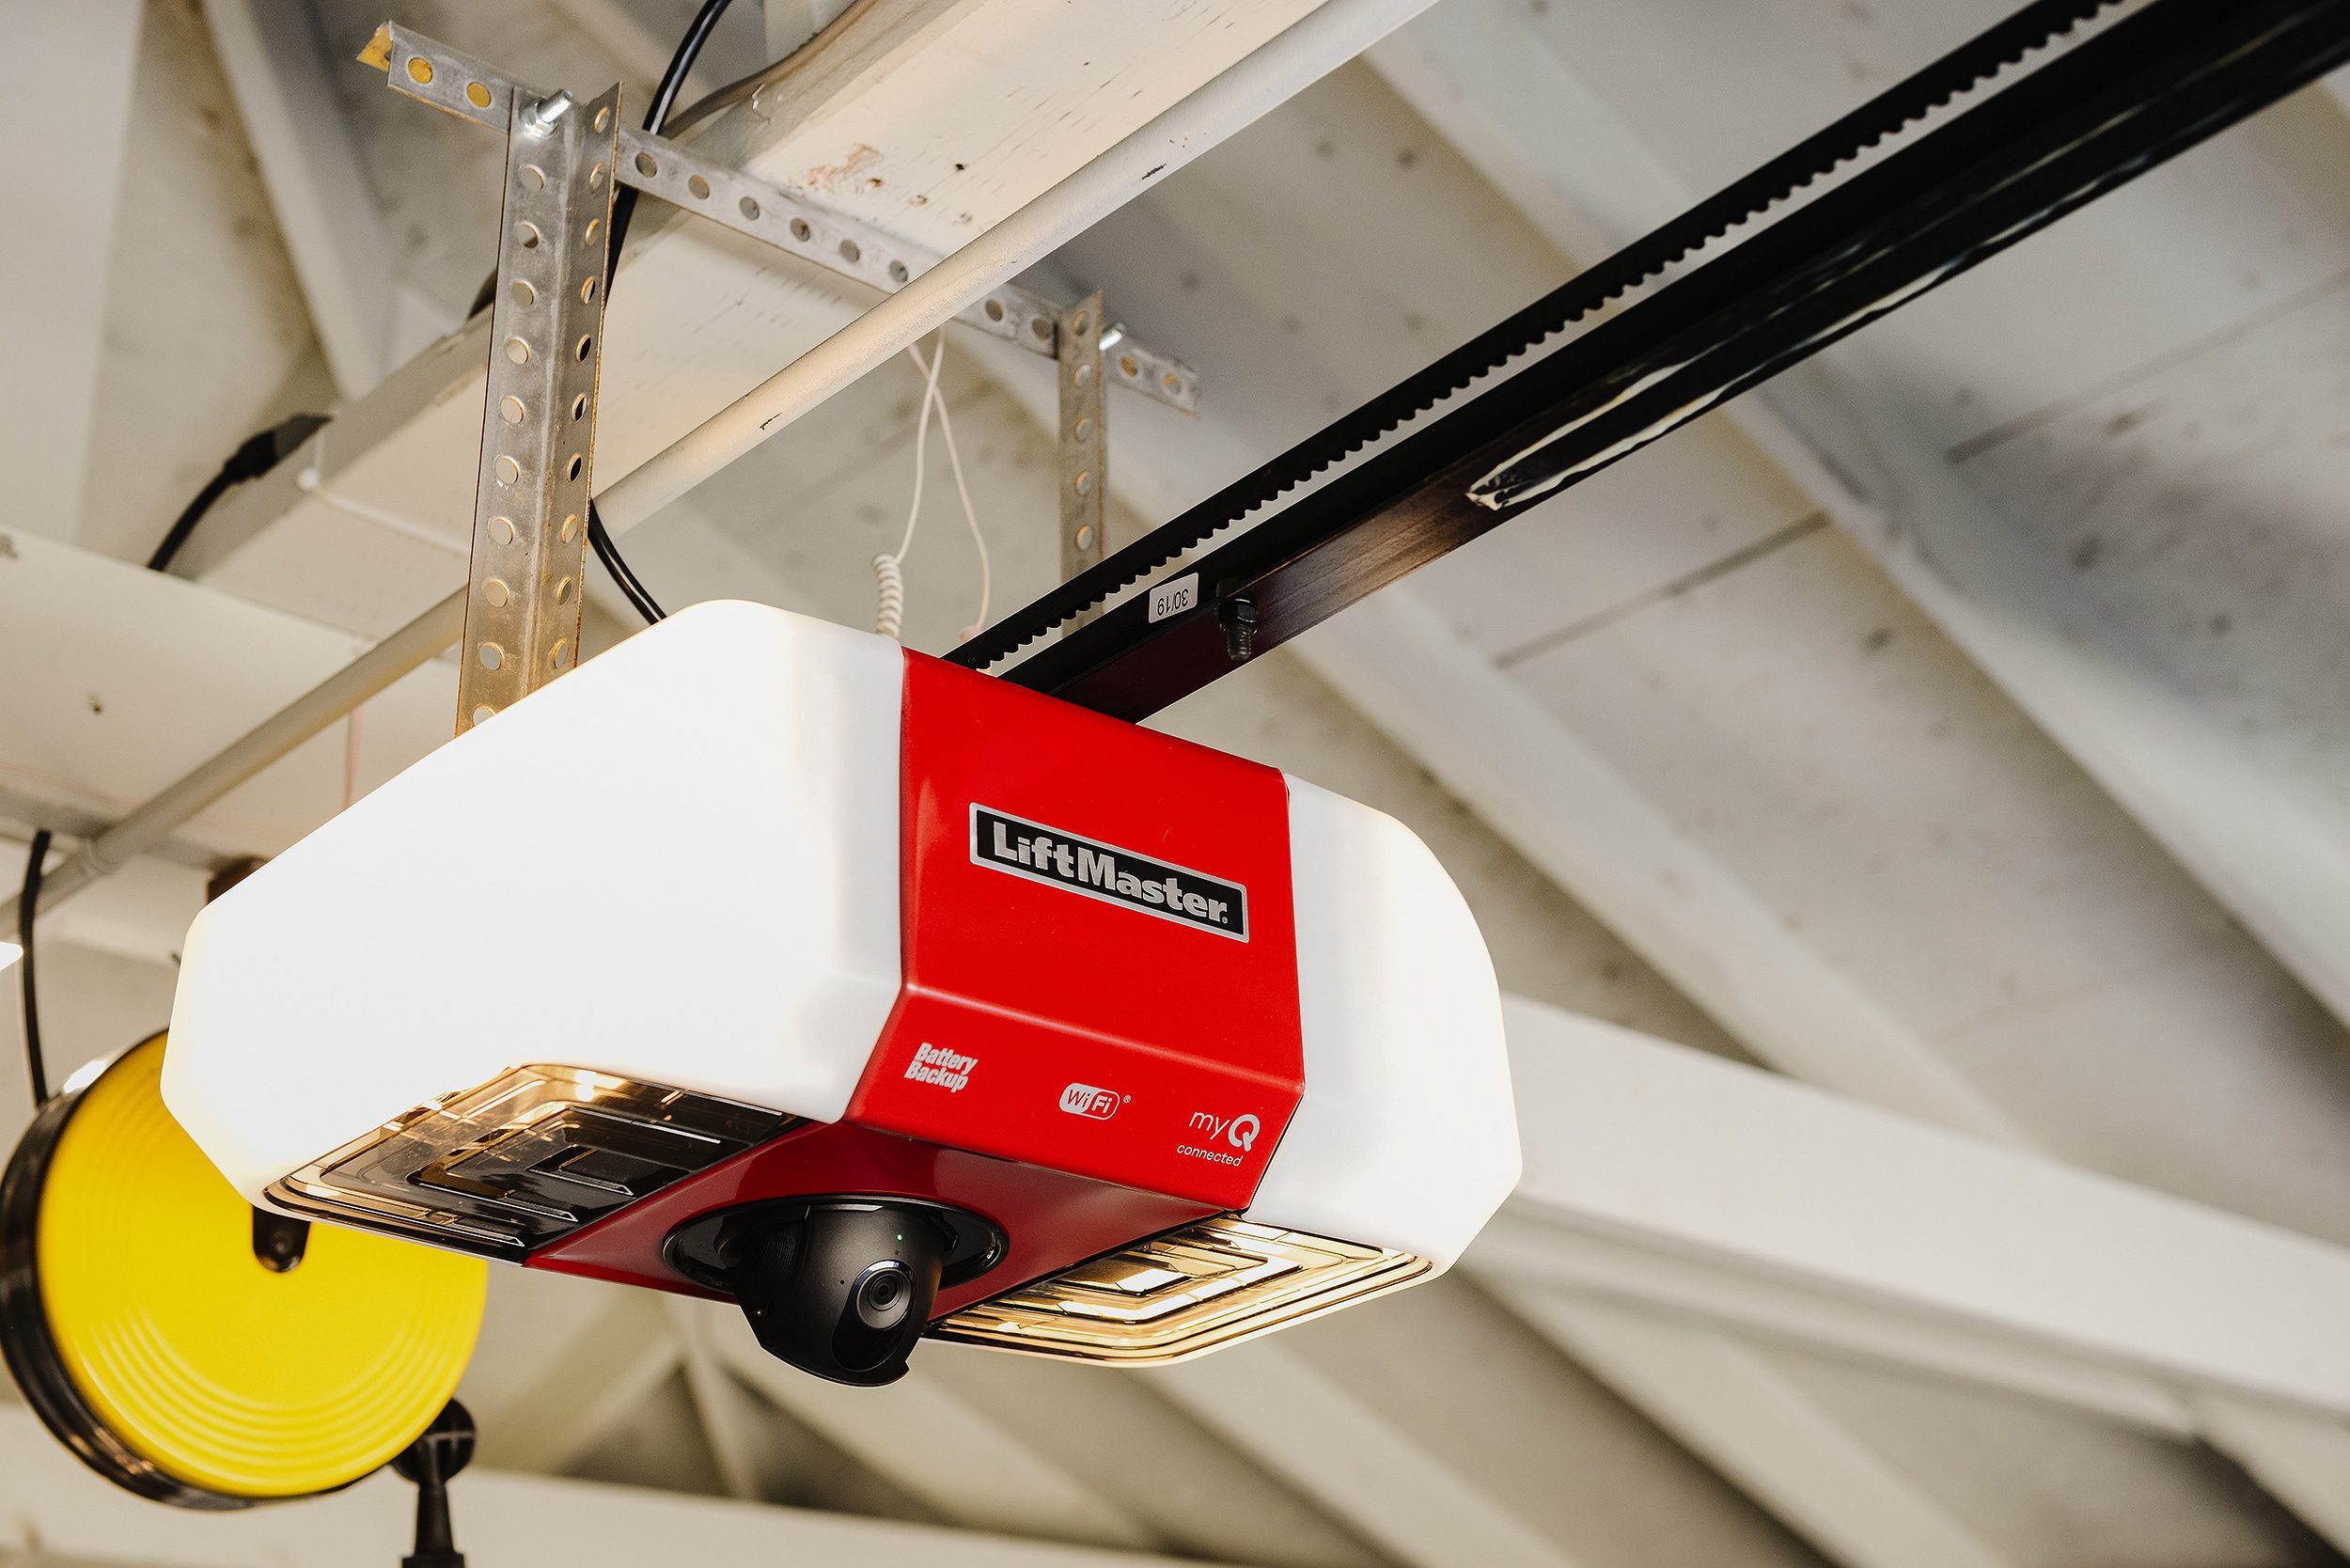 A liftmaster secure view garage door opener in an all white garage // via yellow brick home 